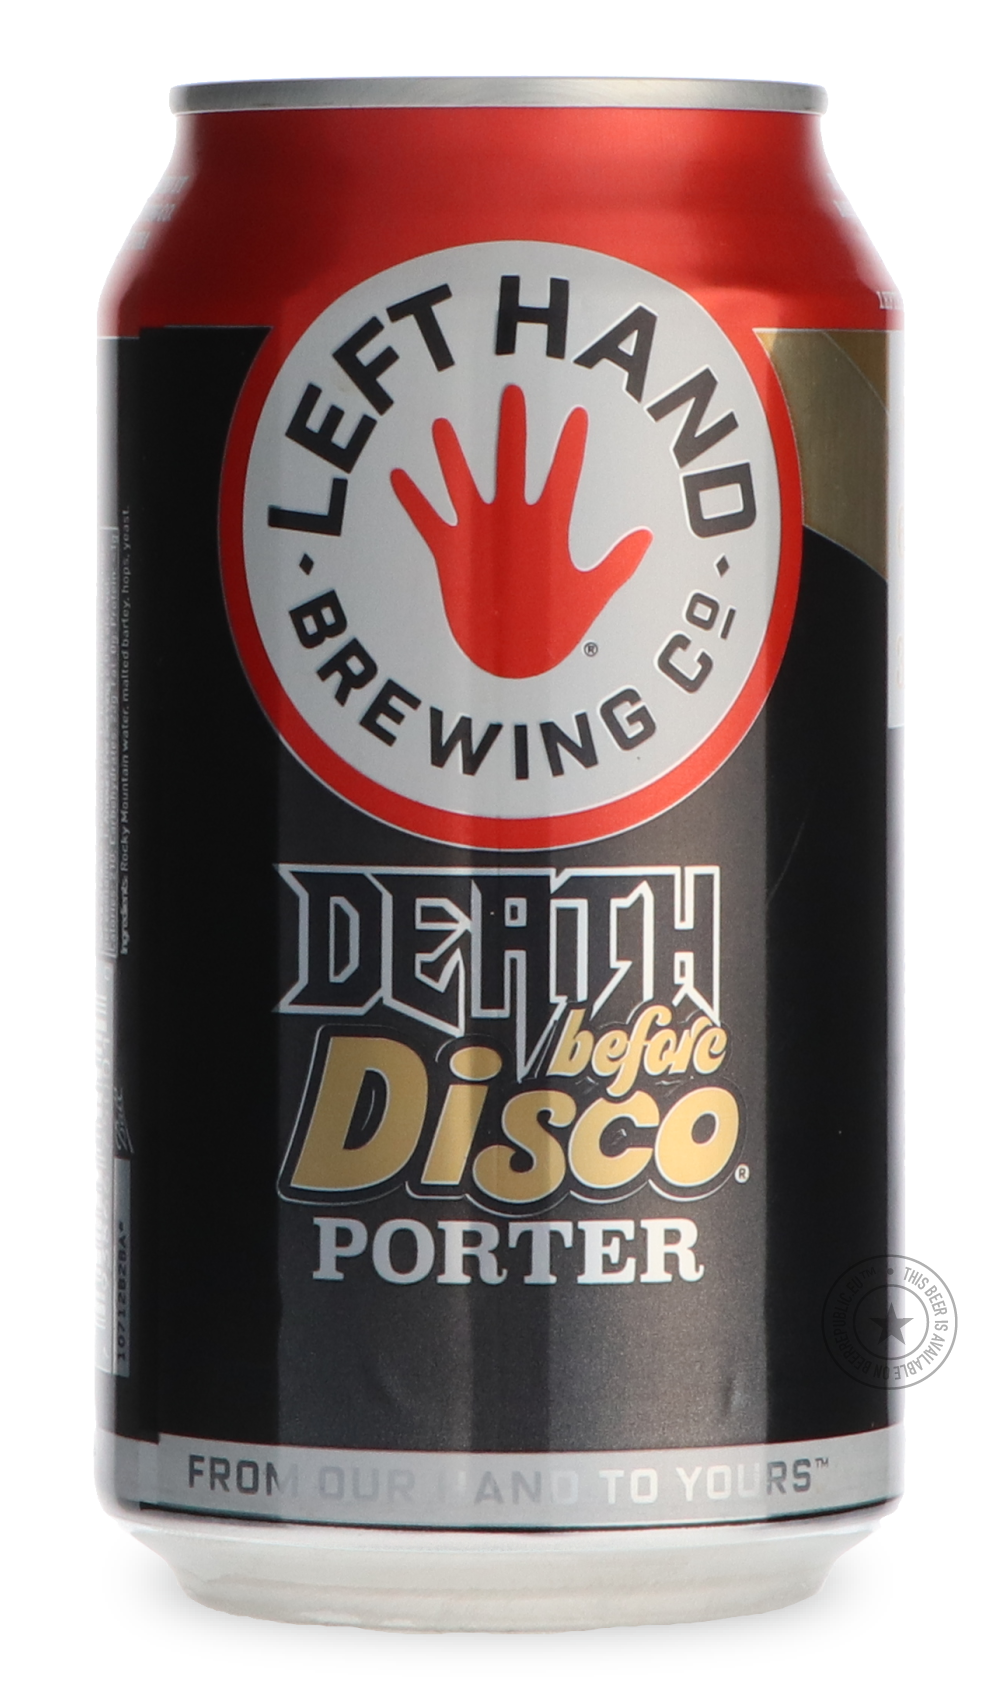 -Left Hand- Death Before Disco-Stout & Porter- Only @ Beer Republic - The best online beer store for American & Canadian craft beer - Buy beer online from the USA and Canada - Bier online kopen - Amerikaans bier kopen - Craft beer store - Craft beer kopen - Amerikanisch bier kaufen - Bier online kaufen - Acheter biere online - IPA - Stout - Porter - New England IPA - Hazy IPA - Imperial Stout - Barrel Aged - Barrel Aged Imperial Stout - Brown - Dark beer - Blond - Blonde - Pilsner - Lager - Wheat - Weizen -